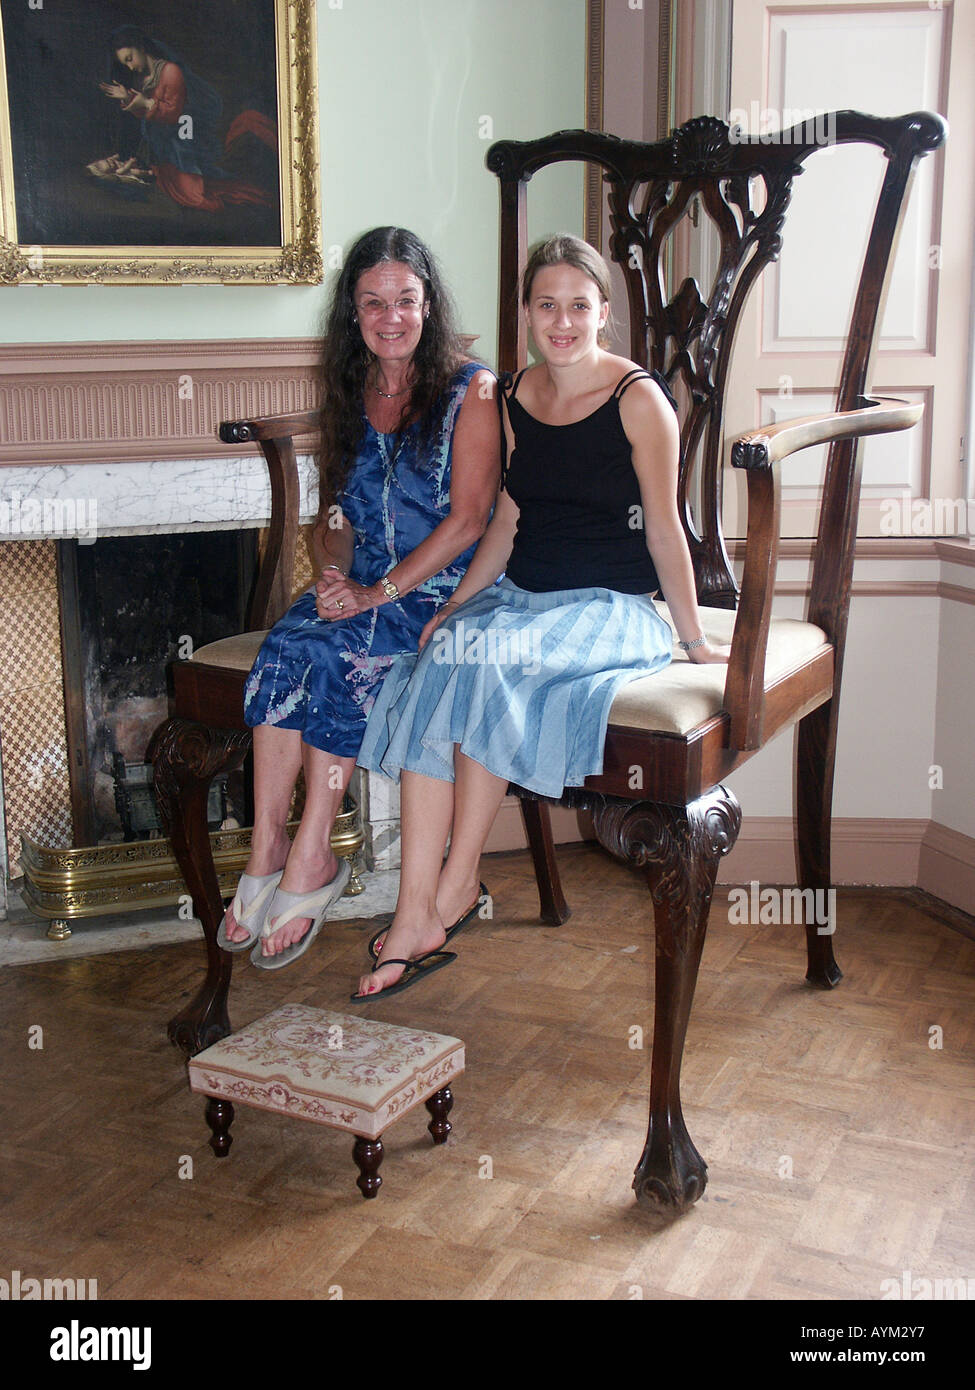 Sitting in giant chair on show at Paxton House Berwickshire Scotland a former Alice in Wonderland film prop Stock Photo